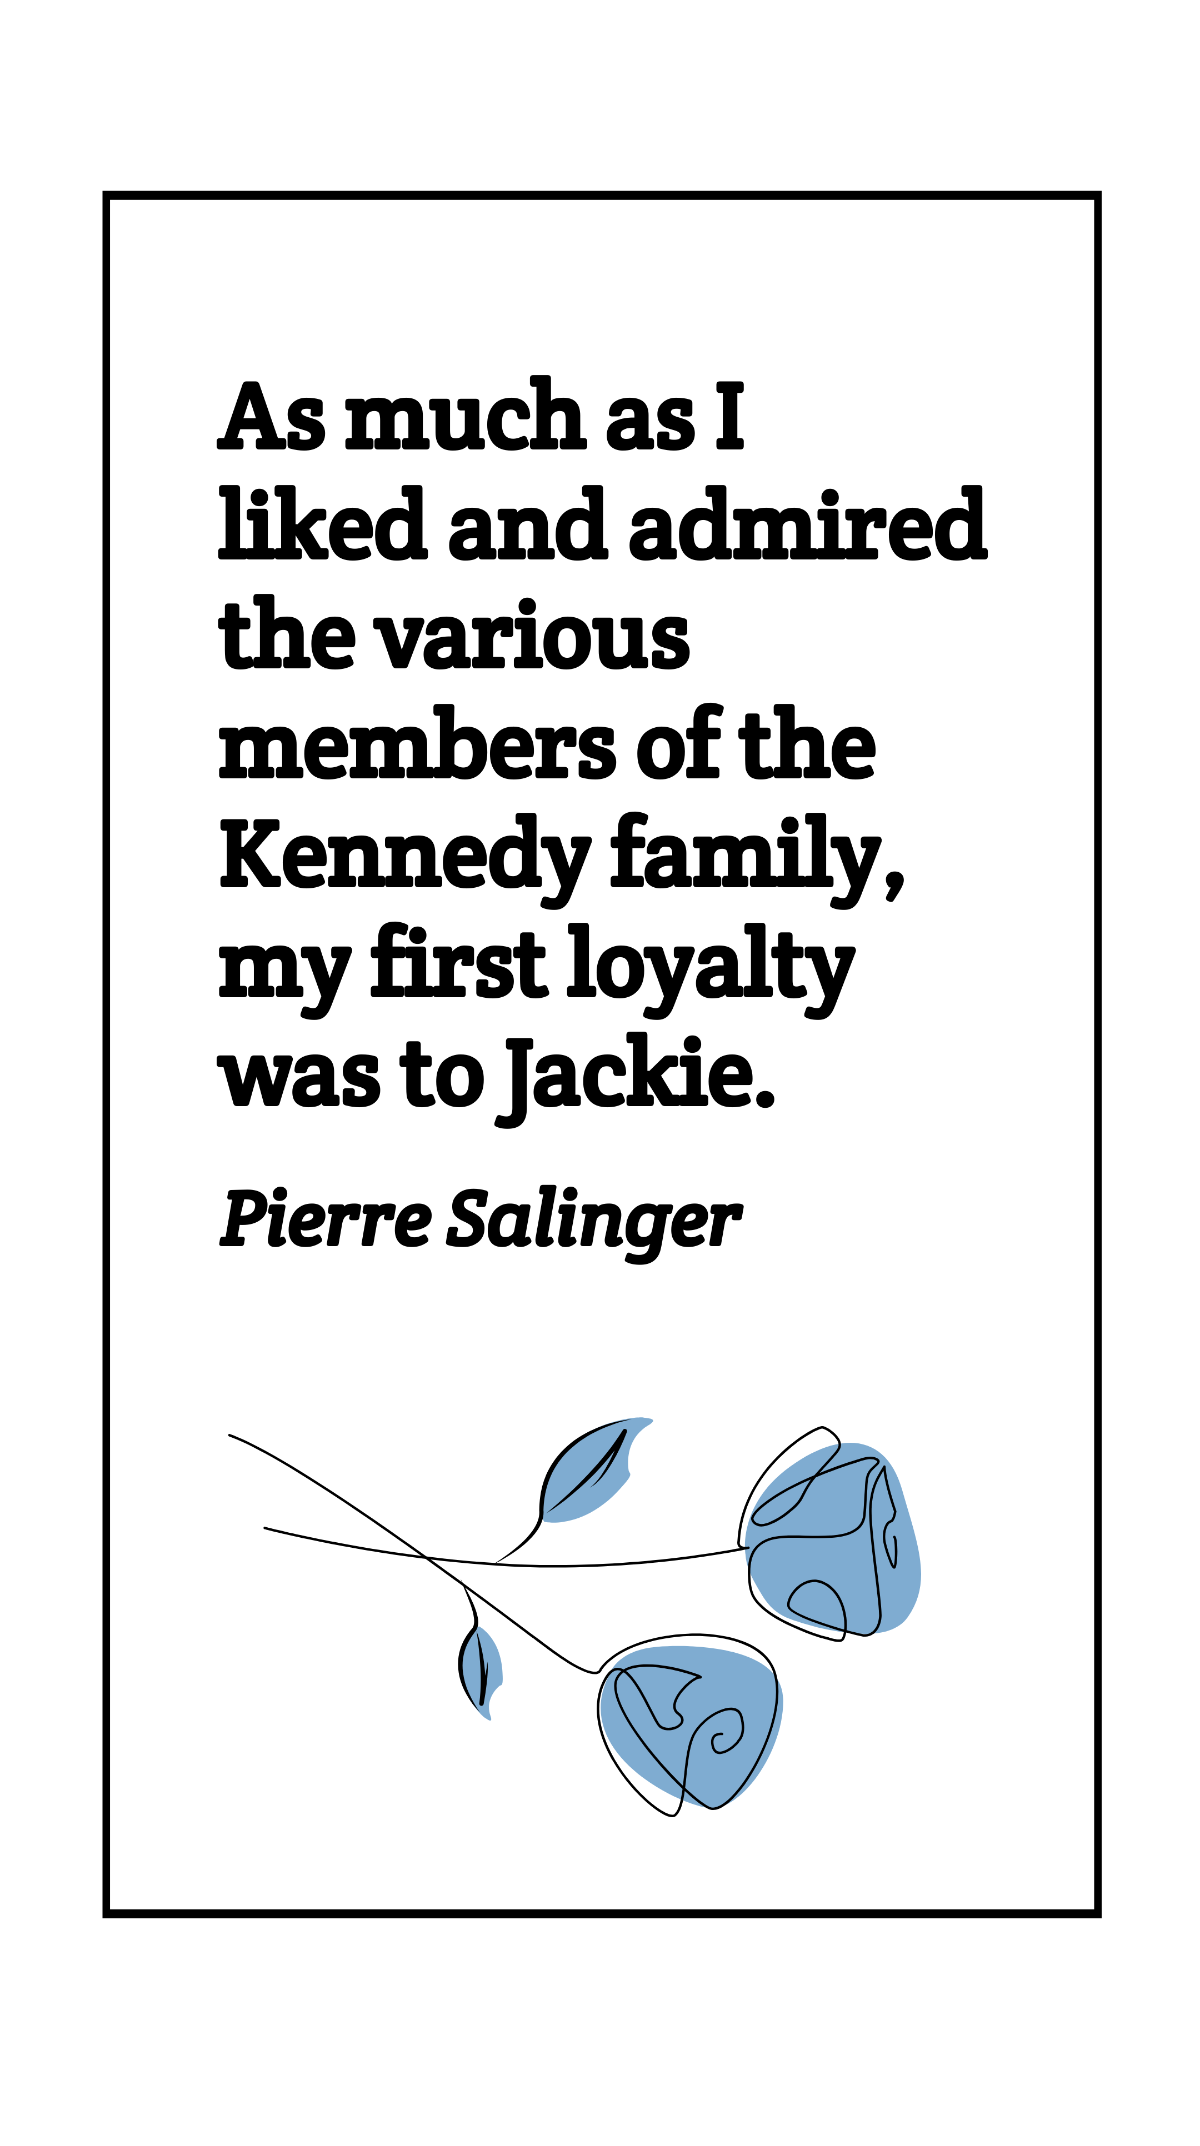 Free Pierre Salinger - As much as I liked and admired the various members of the Kennedy family, my first loyalty was to Jackie. Template